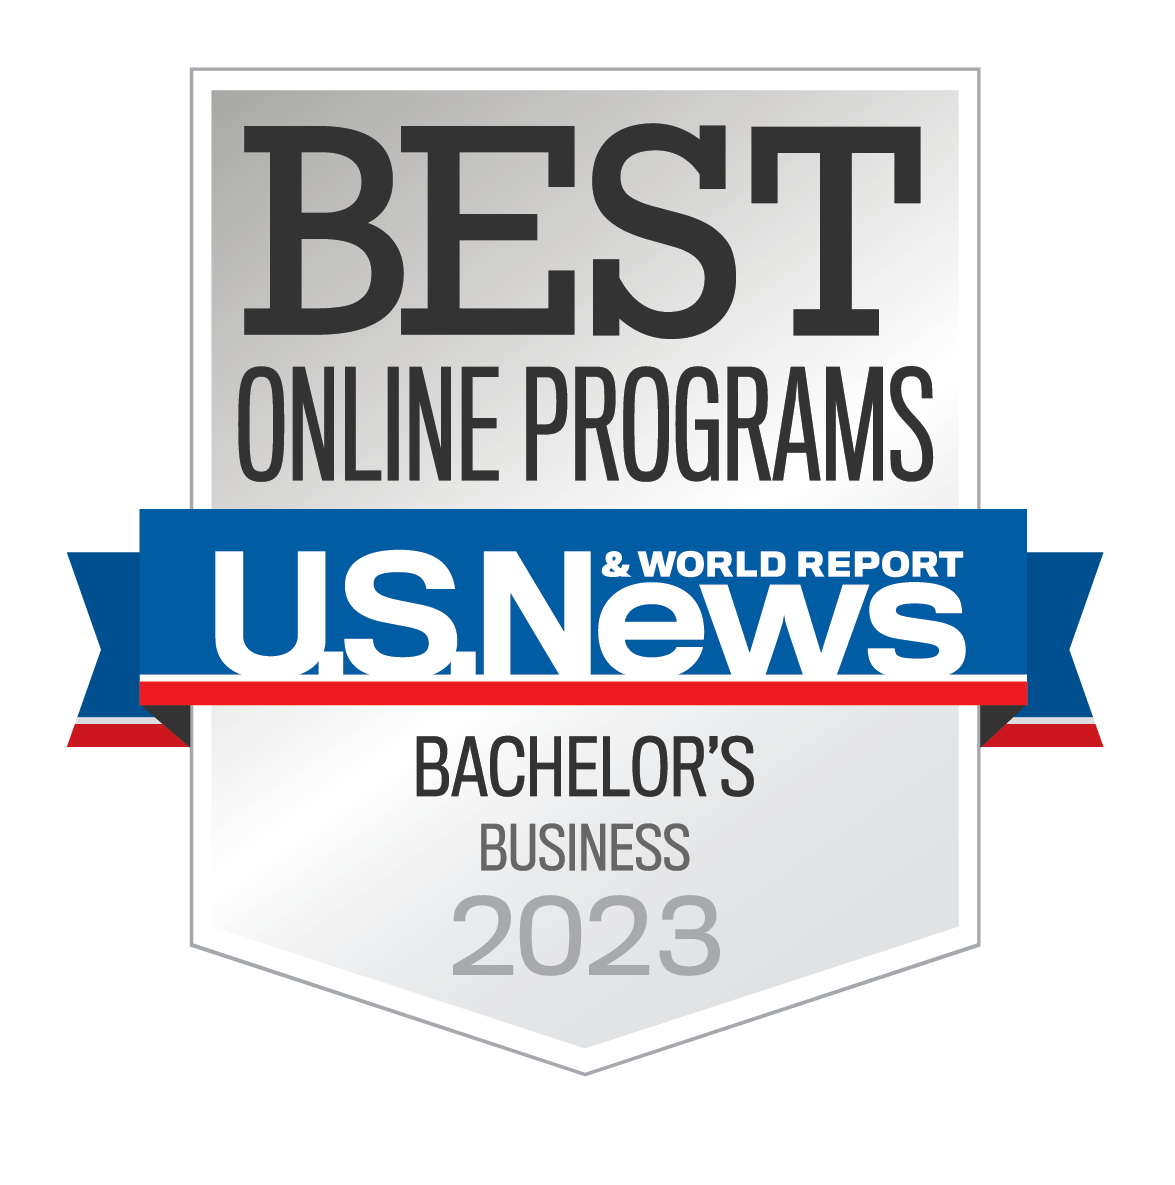 U.S. New and world reports. Best Online Programs: Bachelor's of Business 2023